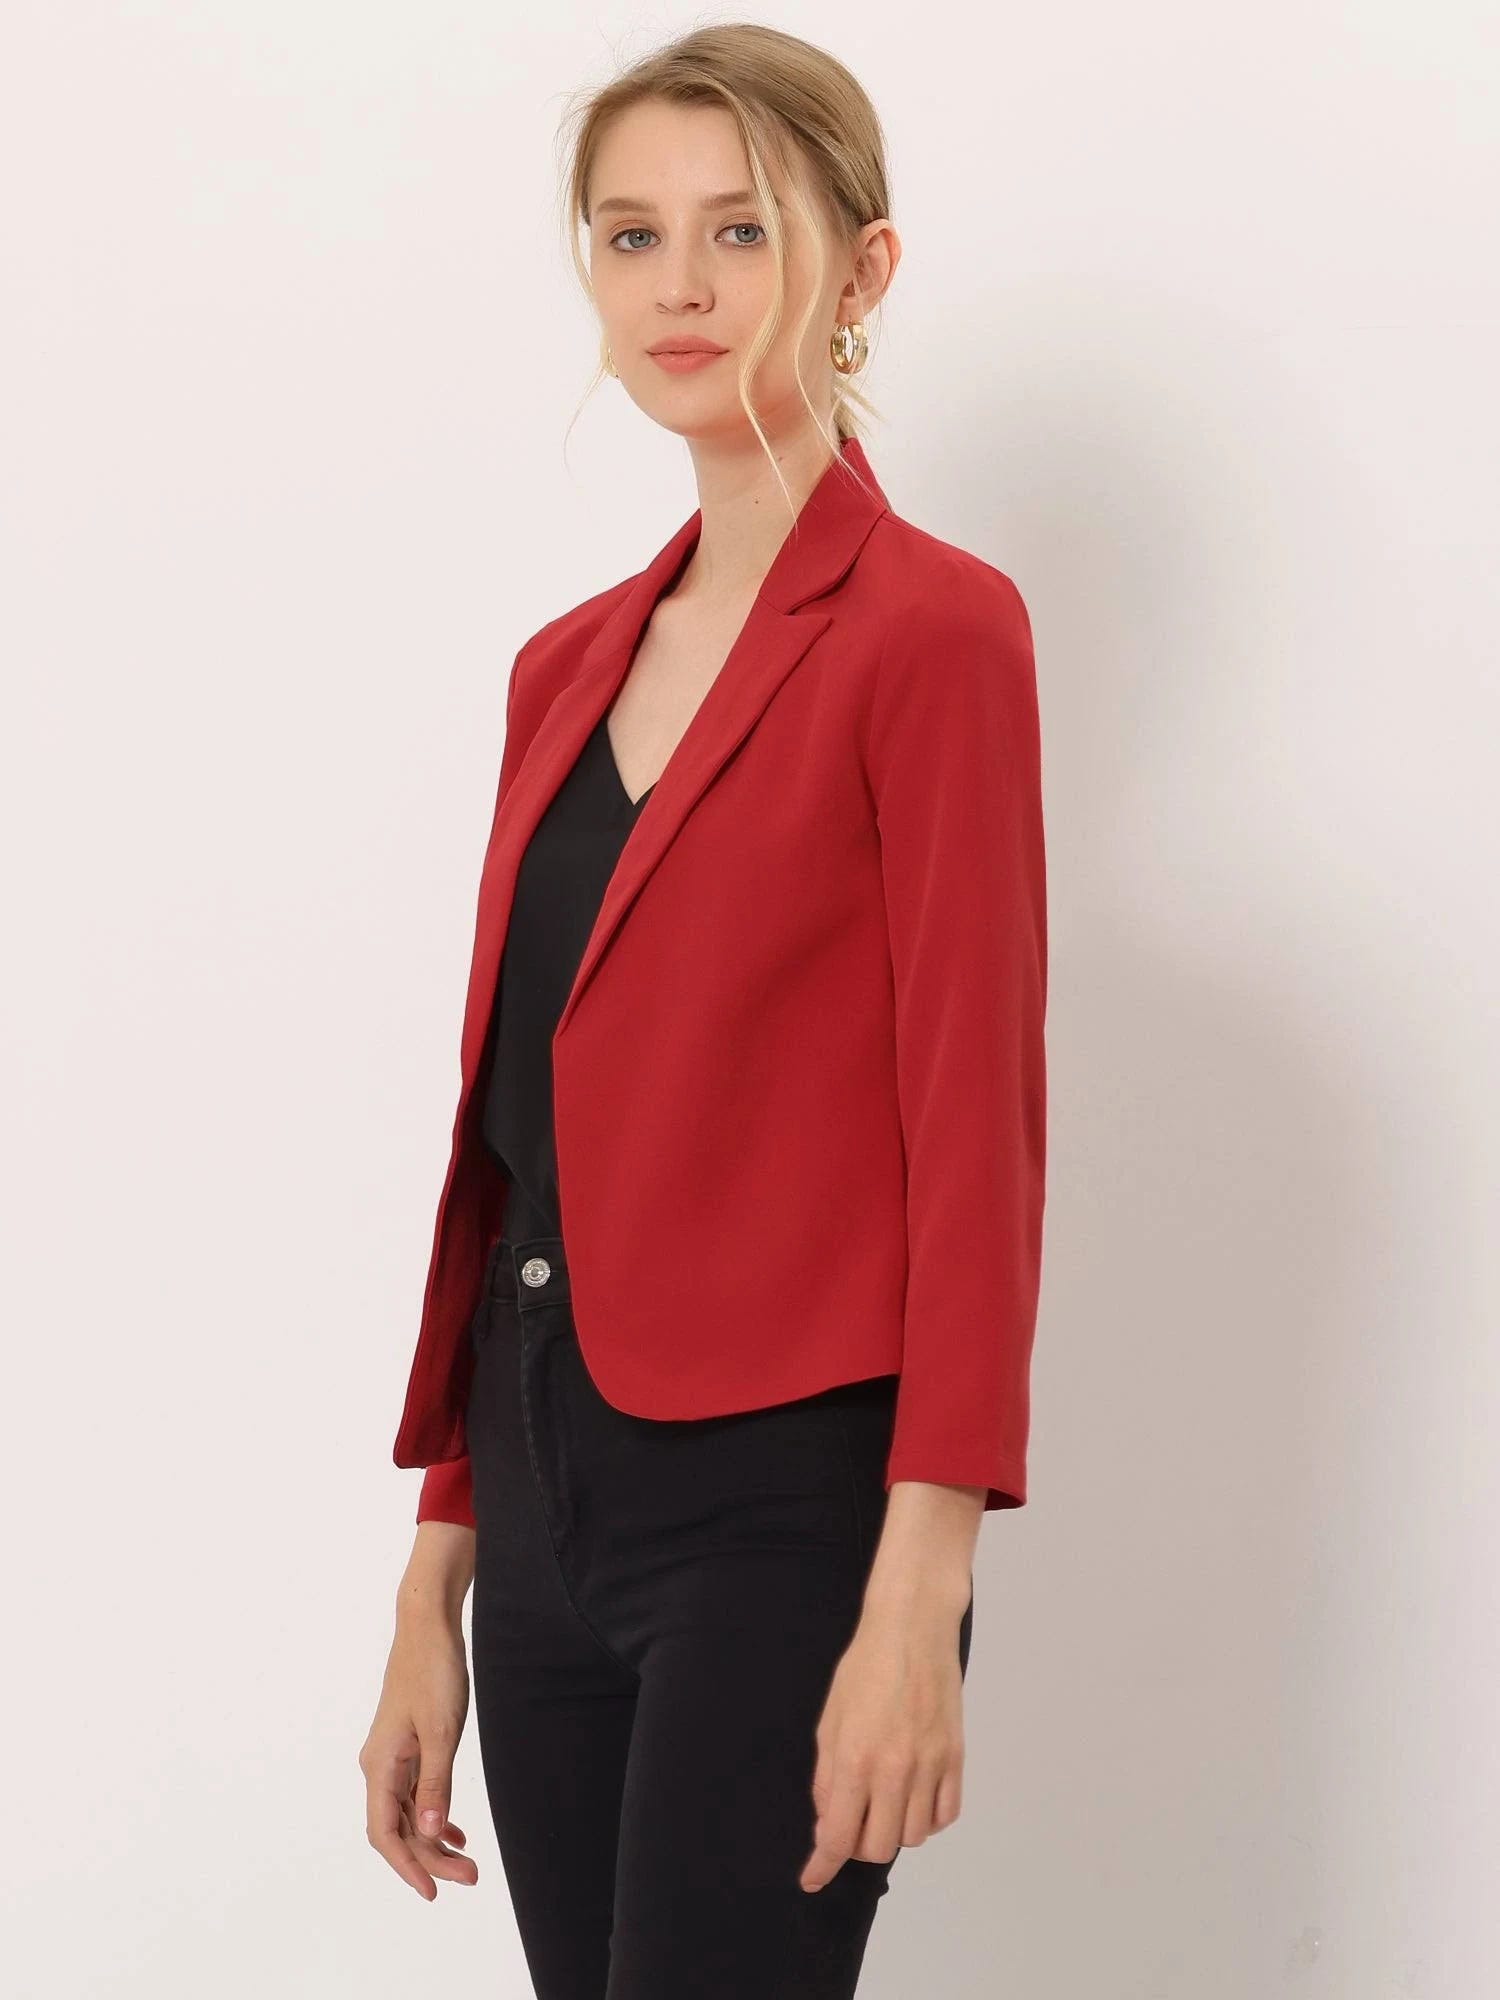 Stylish Open-Front Red Blazer for Professional Workwear | Image